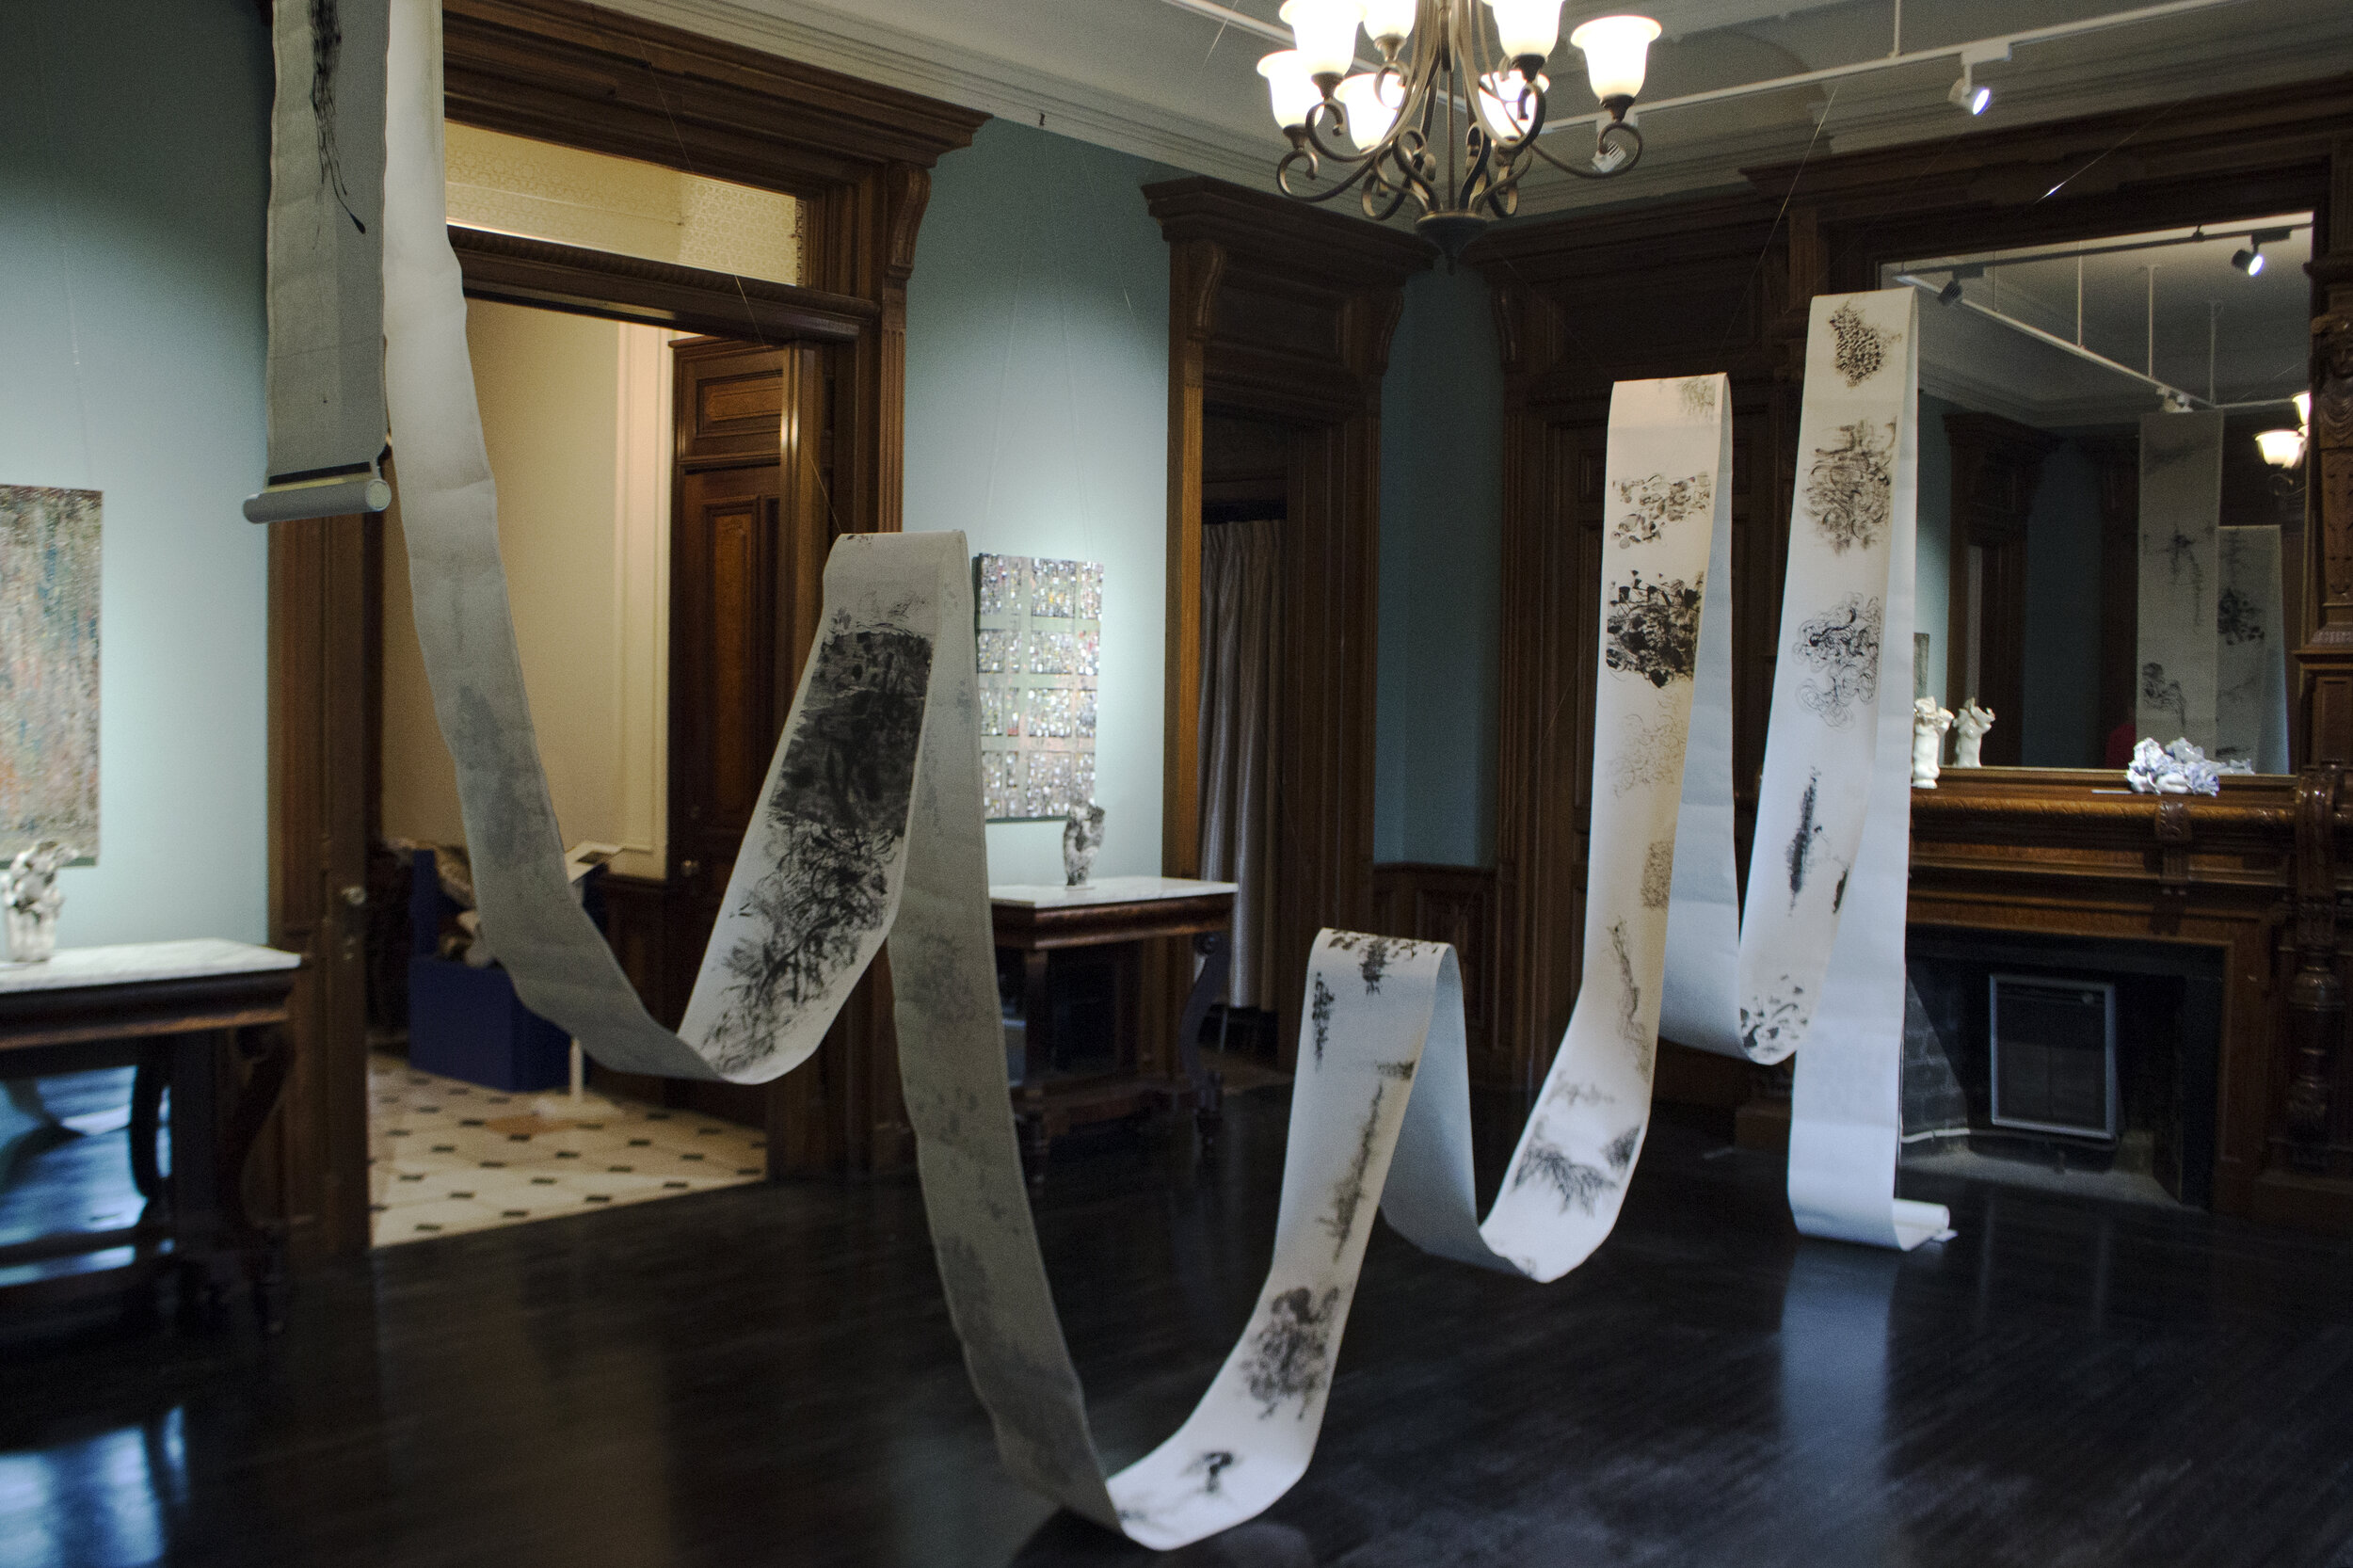 Renqian Yang’s Solo Exhibition at Cayuga Museum of History and Art